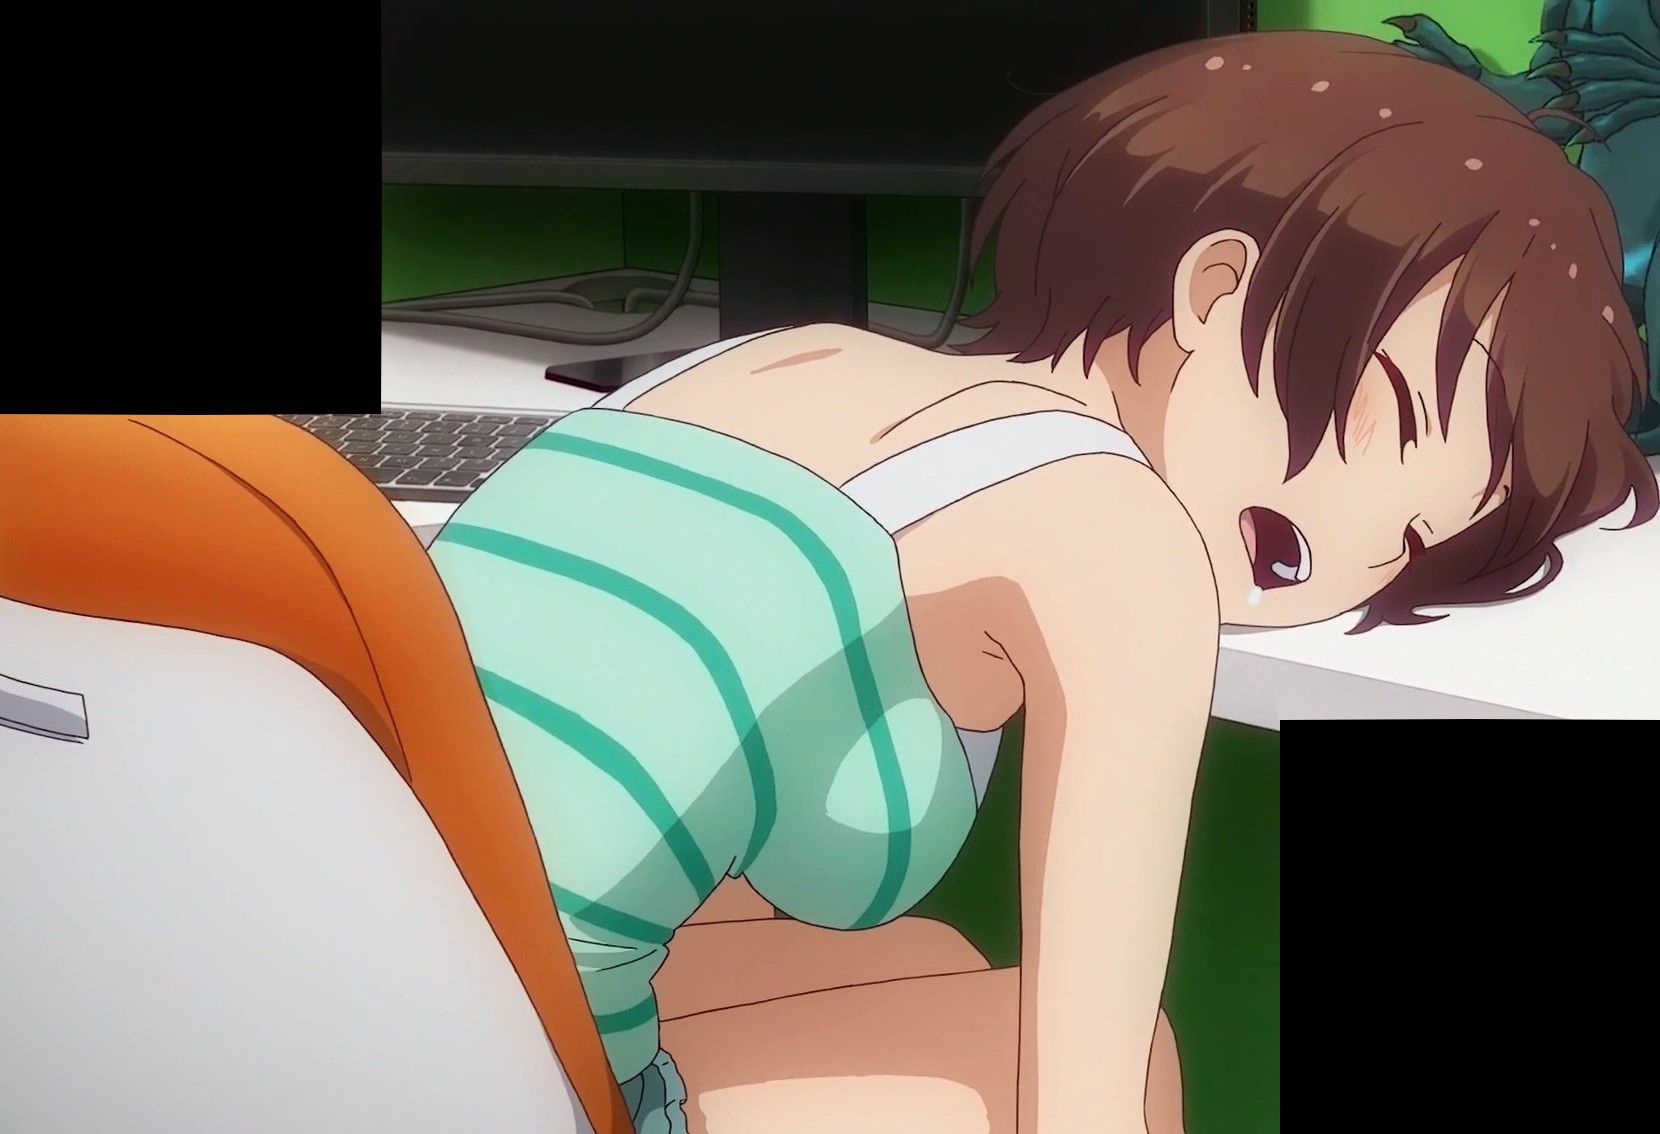 [Artificial mouth times] "NEW GAME! "Of all nine episodes, Yuri hifumi nude too たまらな of wwwwwwwww 24